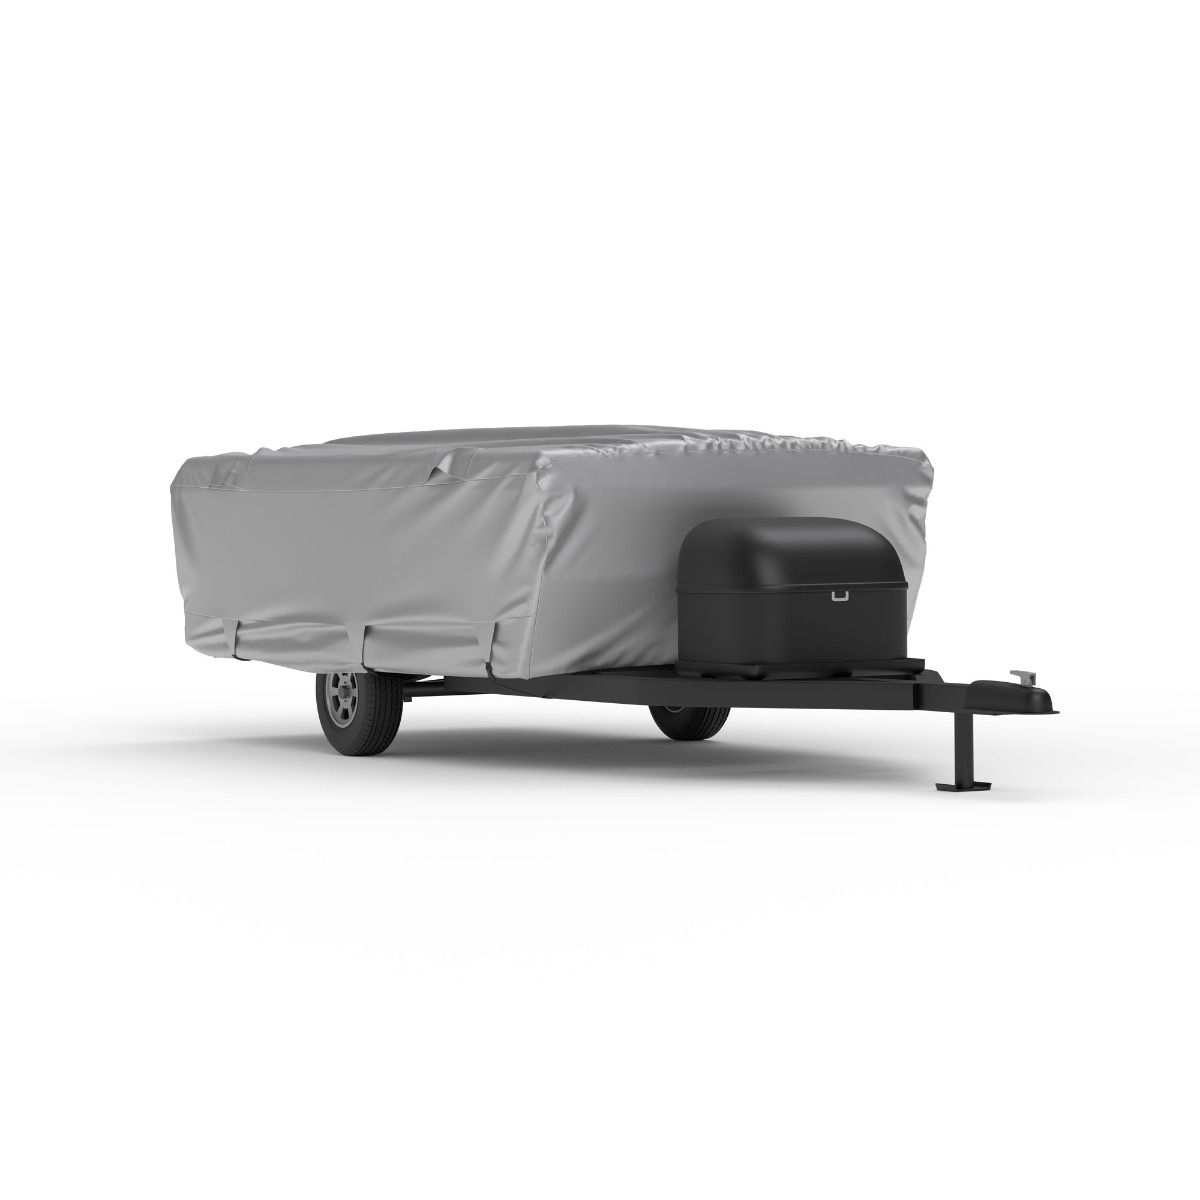 Platinum Shield Folding RV Camping Trailer Cover (Fits 16' to 18' Long)